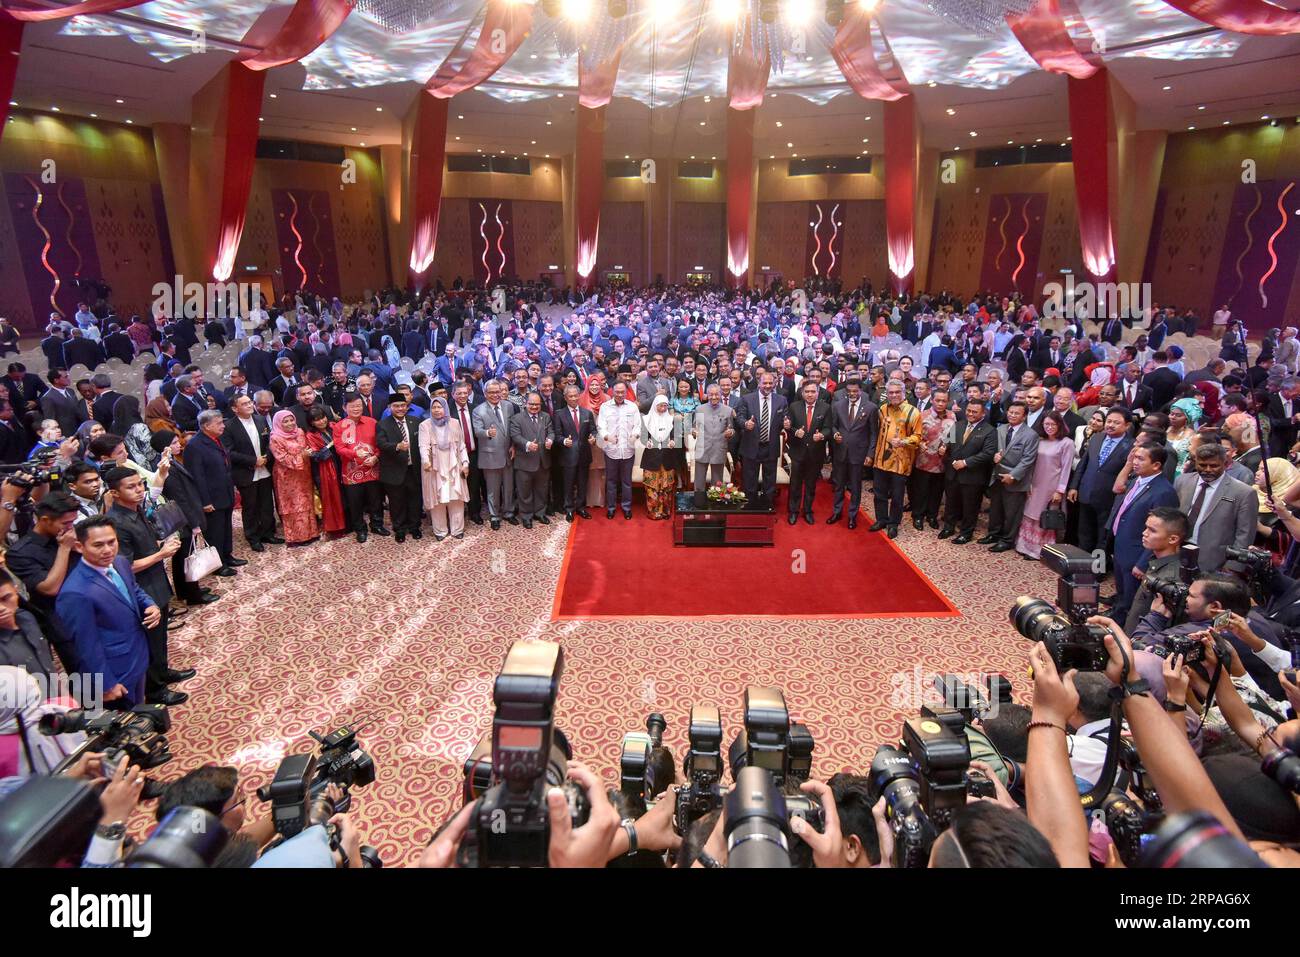 (190509) -- PUTRAJAYA, May 9, 2019 (Xinhua) -- Malaysian Prime Minister Mahathir Mohamad poses with his government ministers for photos at an event to mark the first year since his Pakatan Harapan (PH) coalition won power at the national polls on May 9 last year, in Putrajaya, Malaysia, May 9, 2019. Malaysia has achieved progress in combating corruption and in restoring government institutions after taking over the government in a smooth transition but much remains to be done especially in repairing the national economy, Malaysian Prime Minister Mahathir Mohamad said on Thursday. (Xinhua/Chong Stock Photo